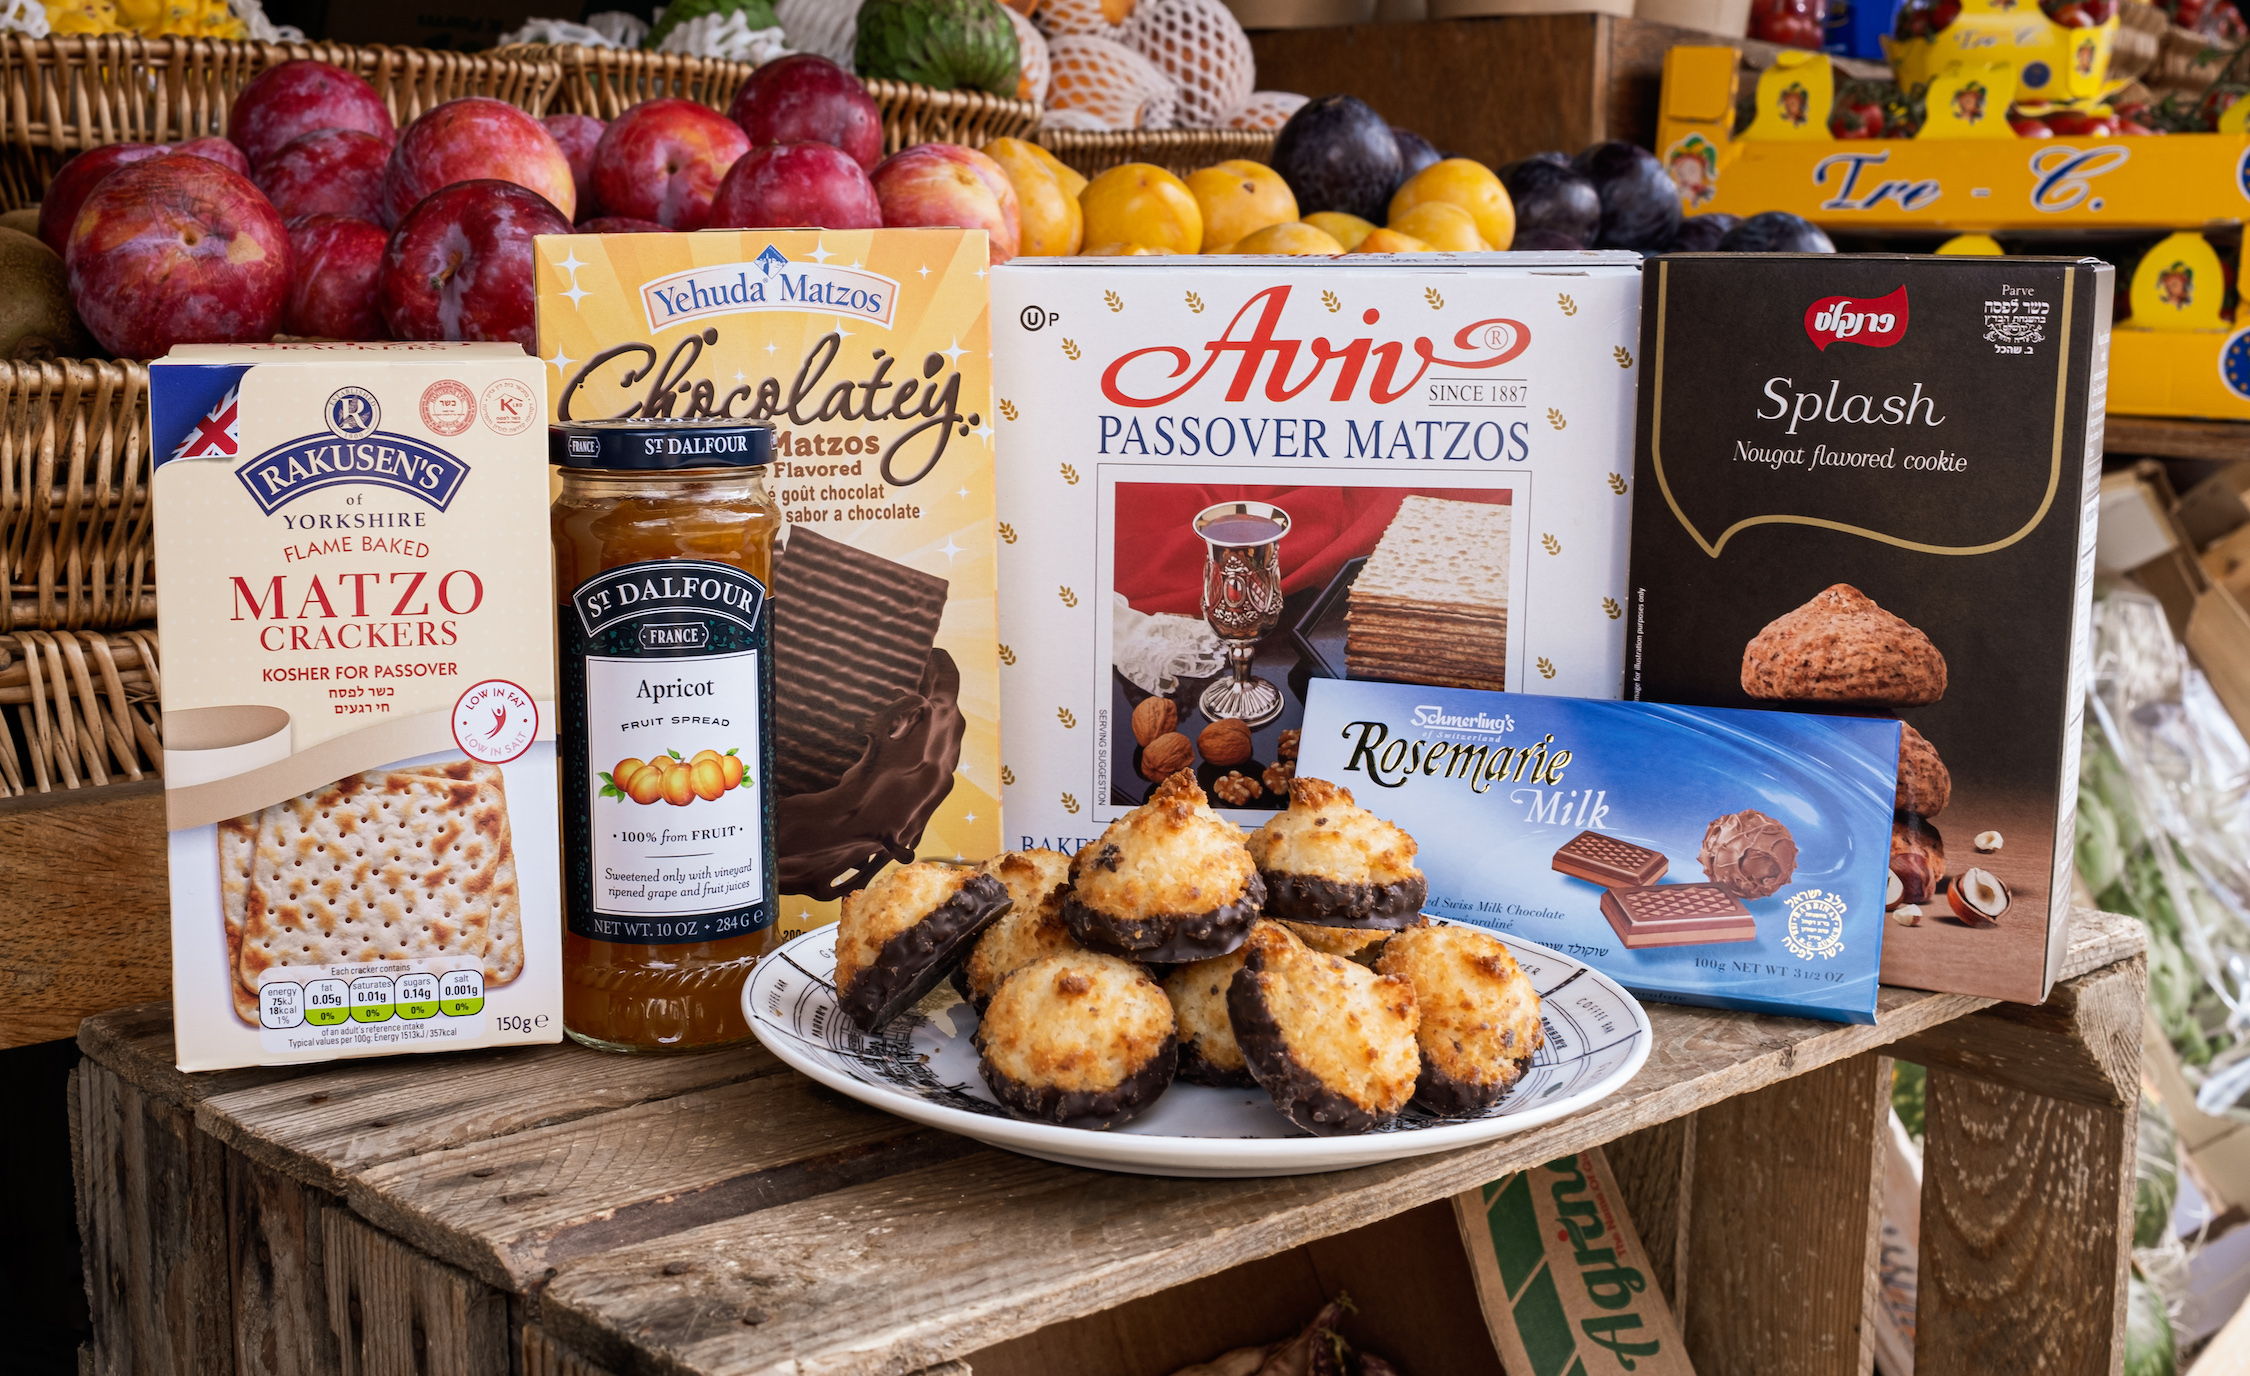 A selection of the Passover range at Panzer's Deli & Grocery